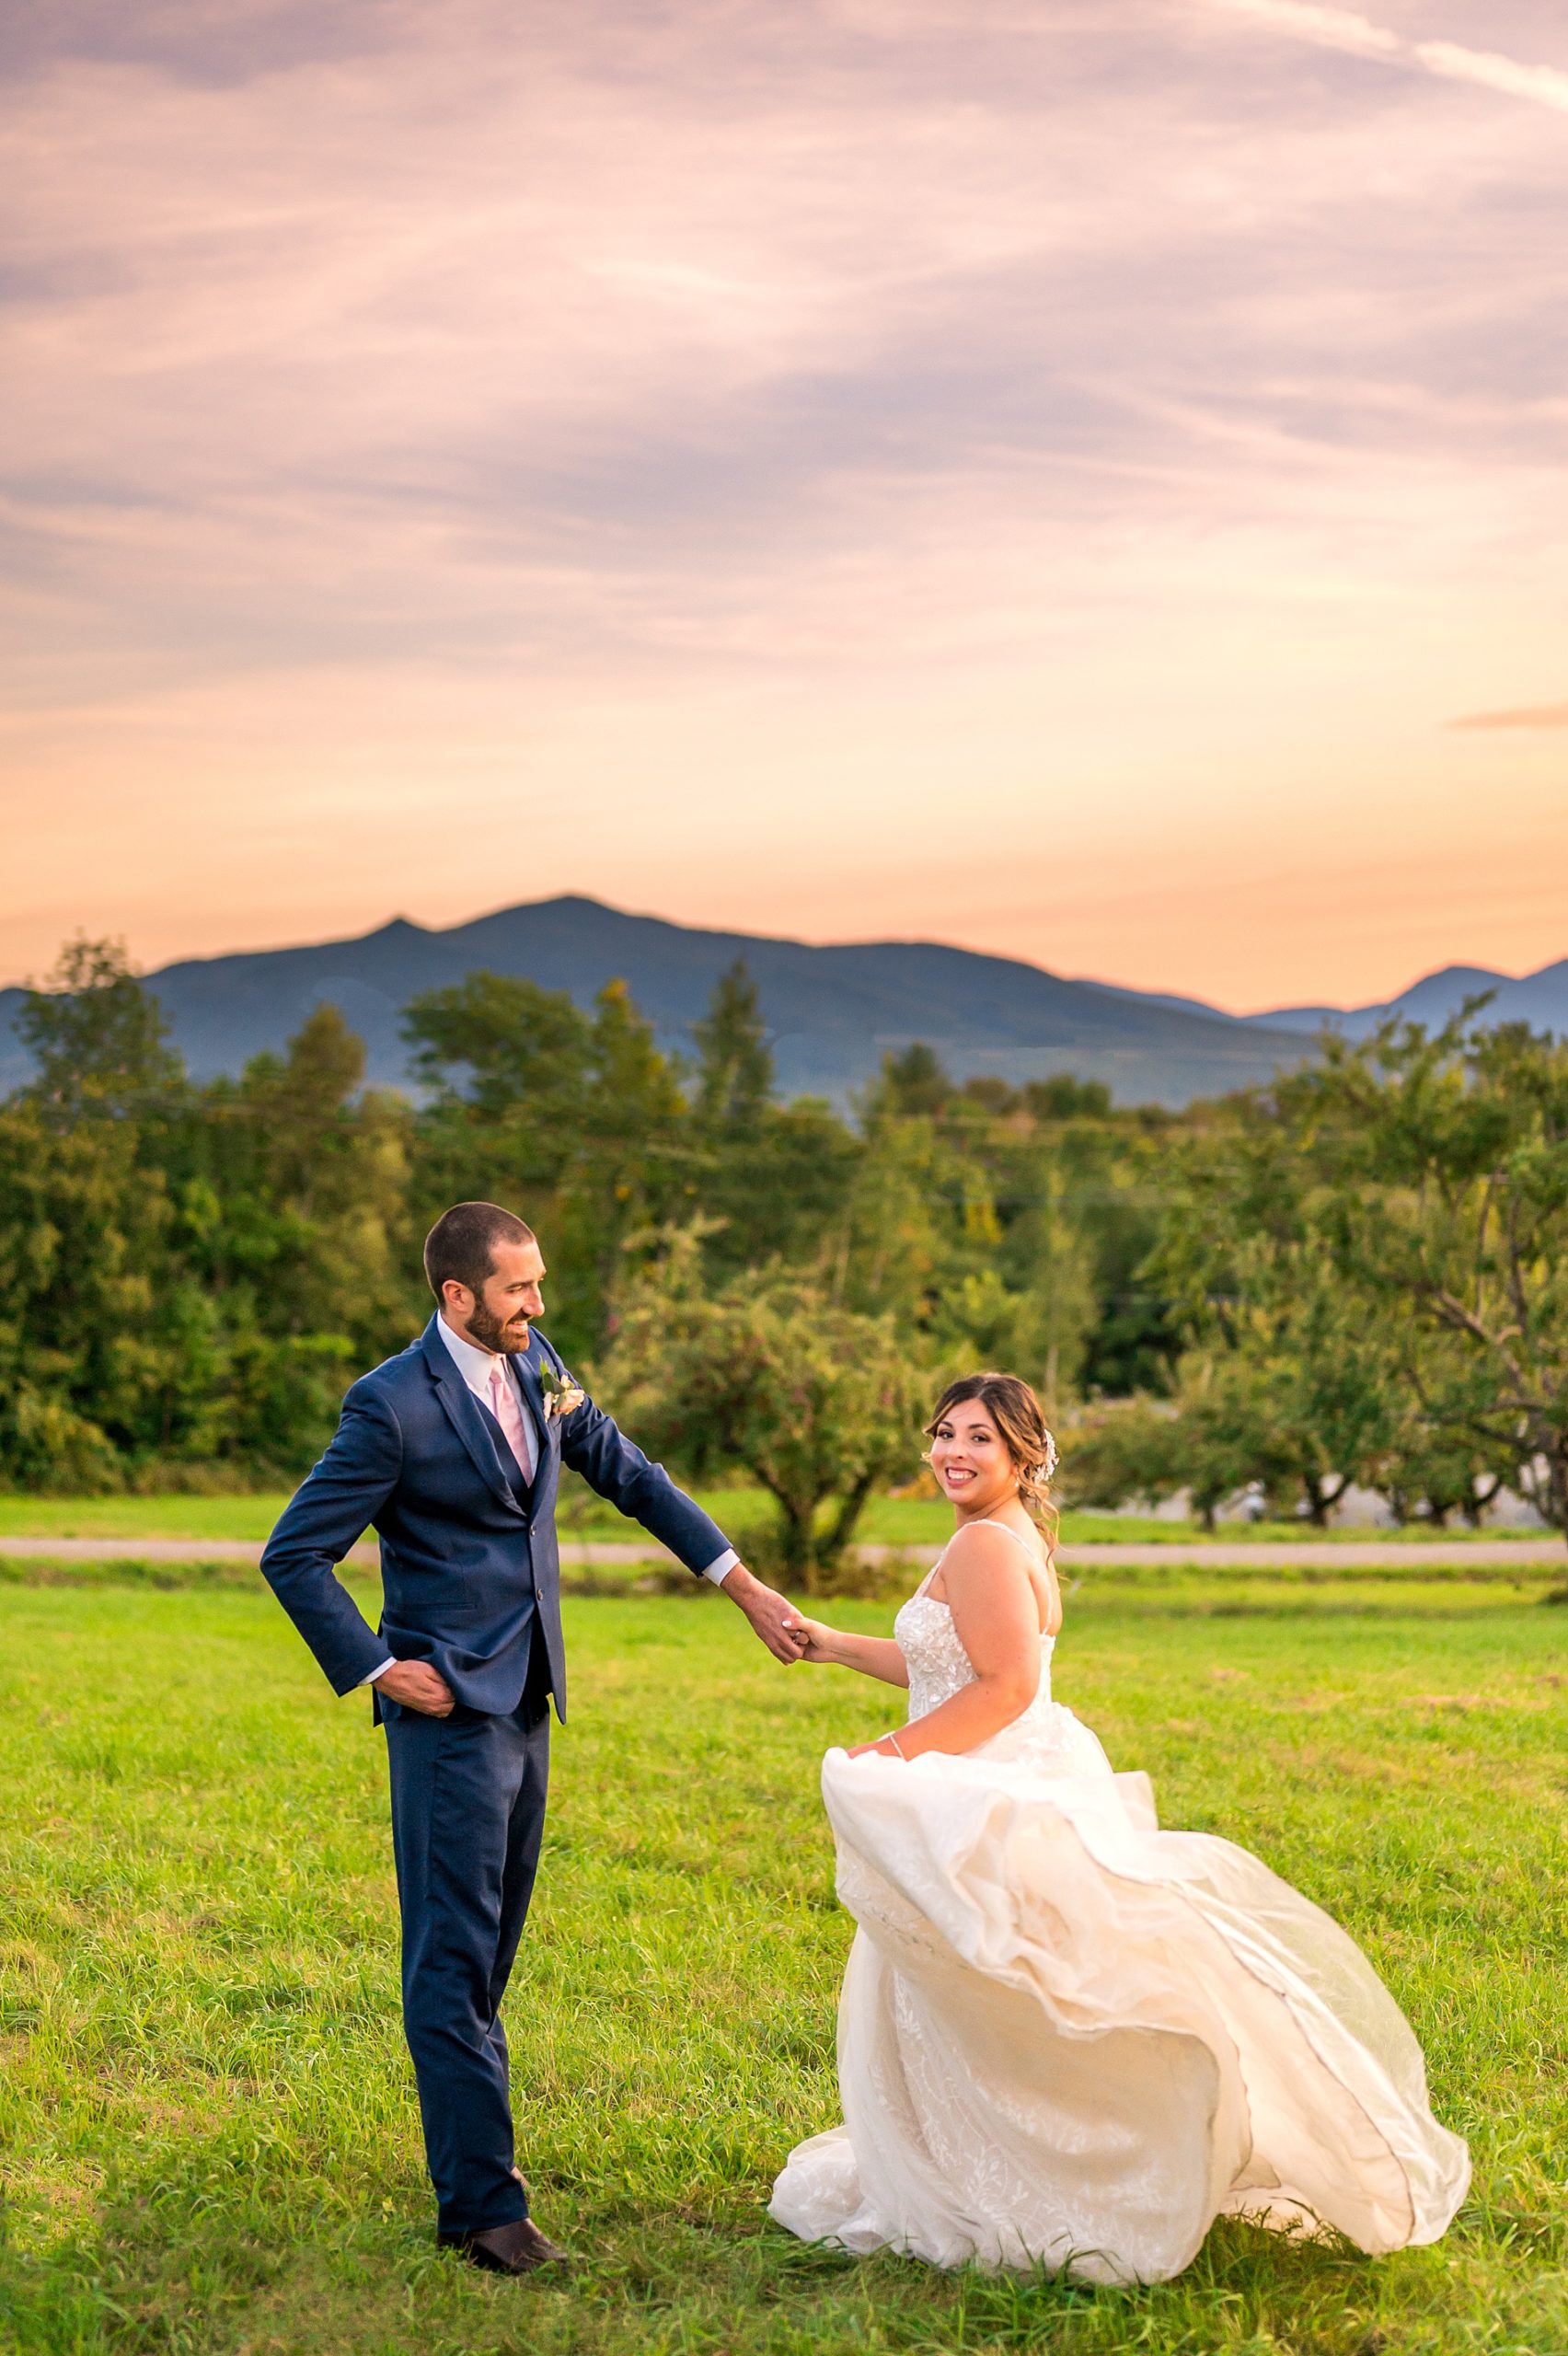 Bellevue Barn Summer Wedding portraits with White mountains in the background